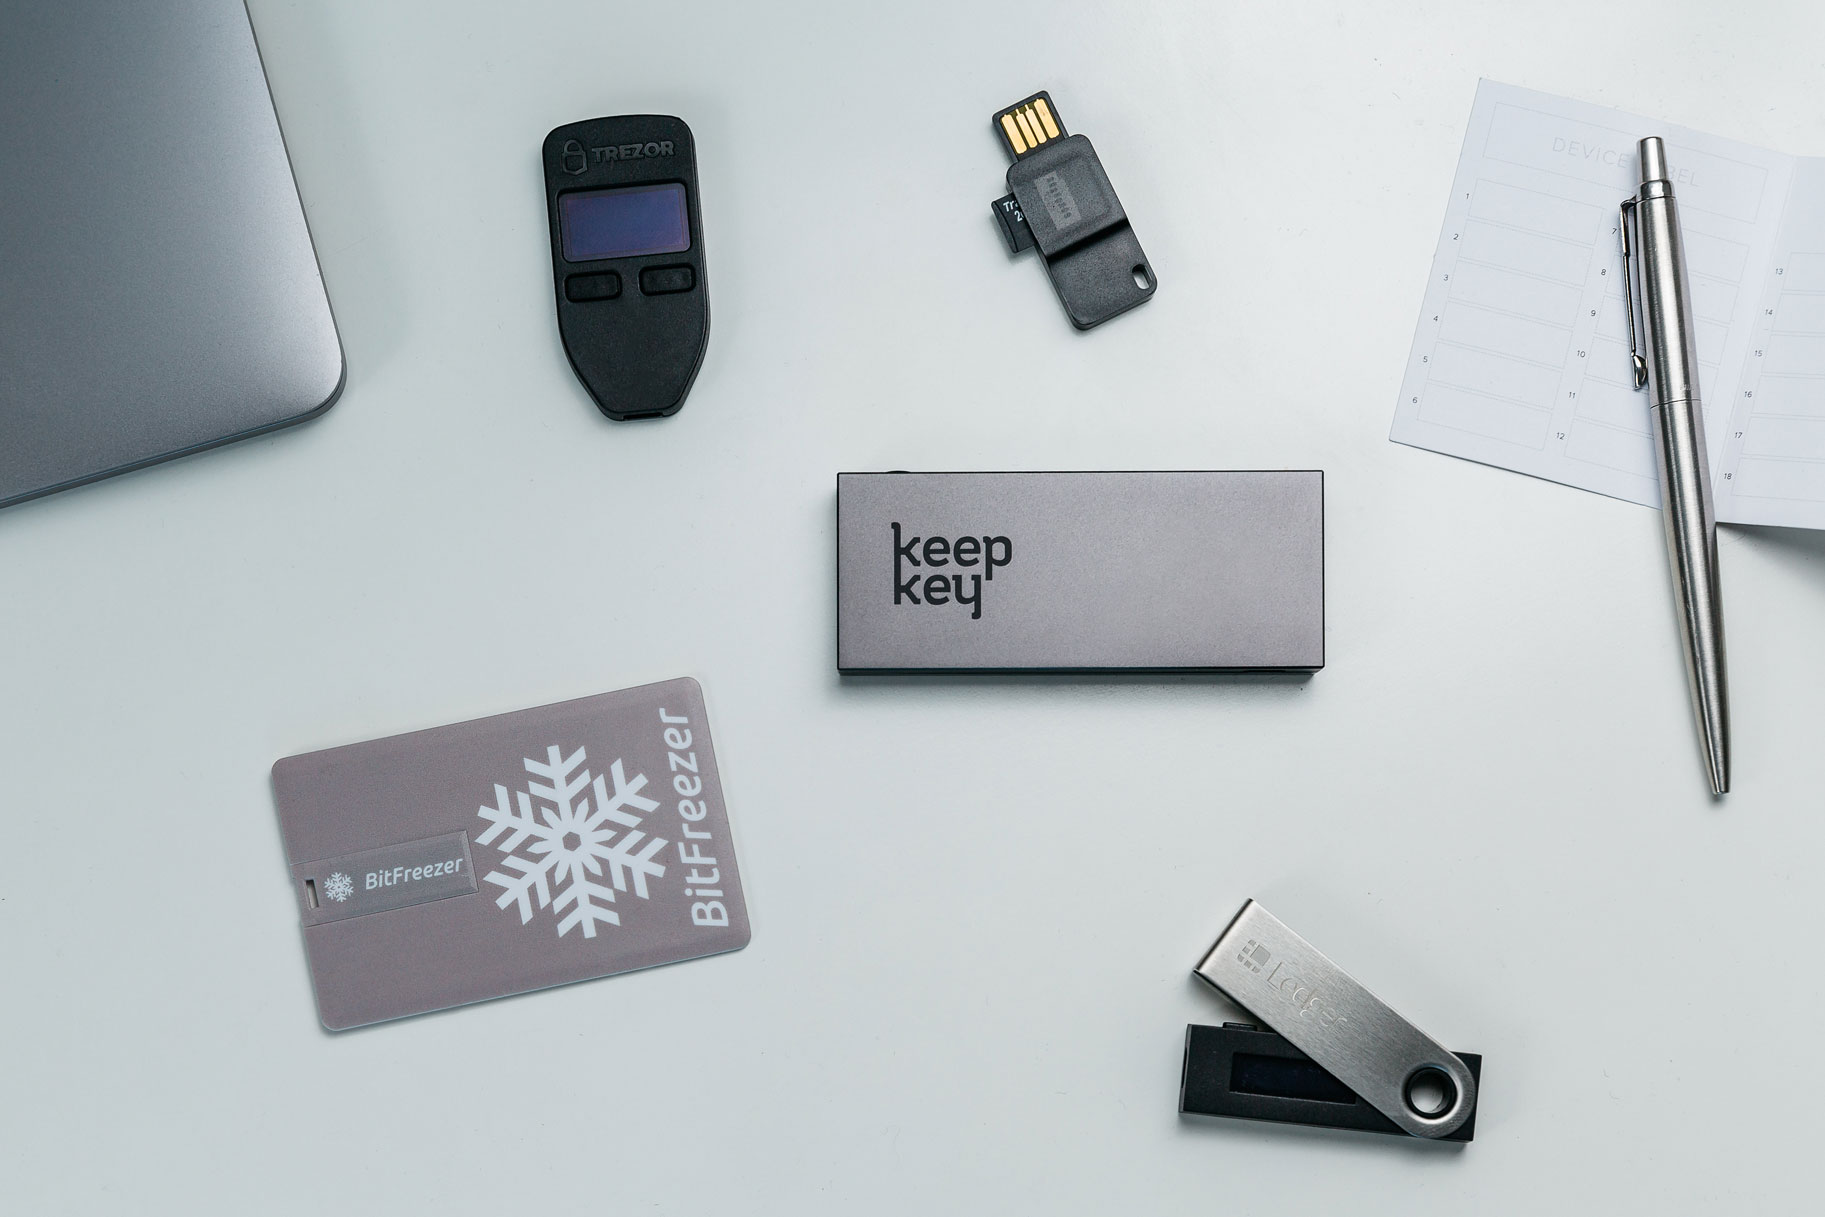 Types of hardware wallets